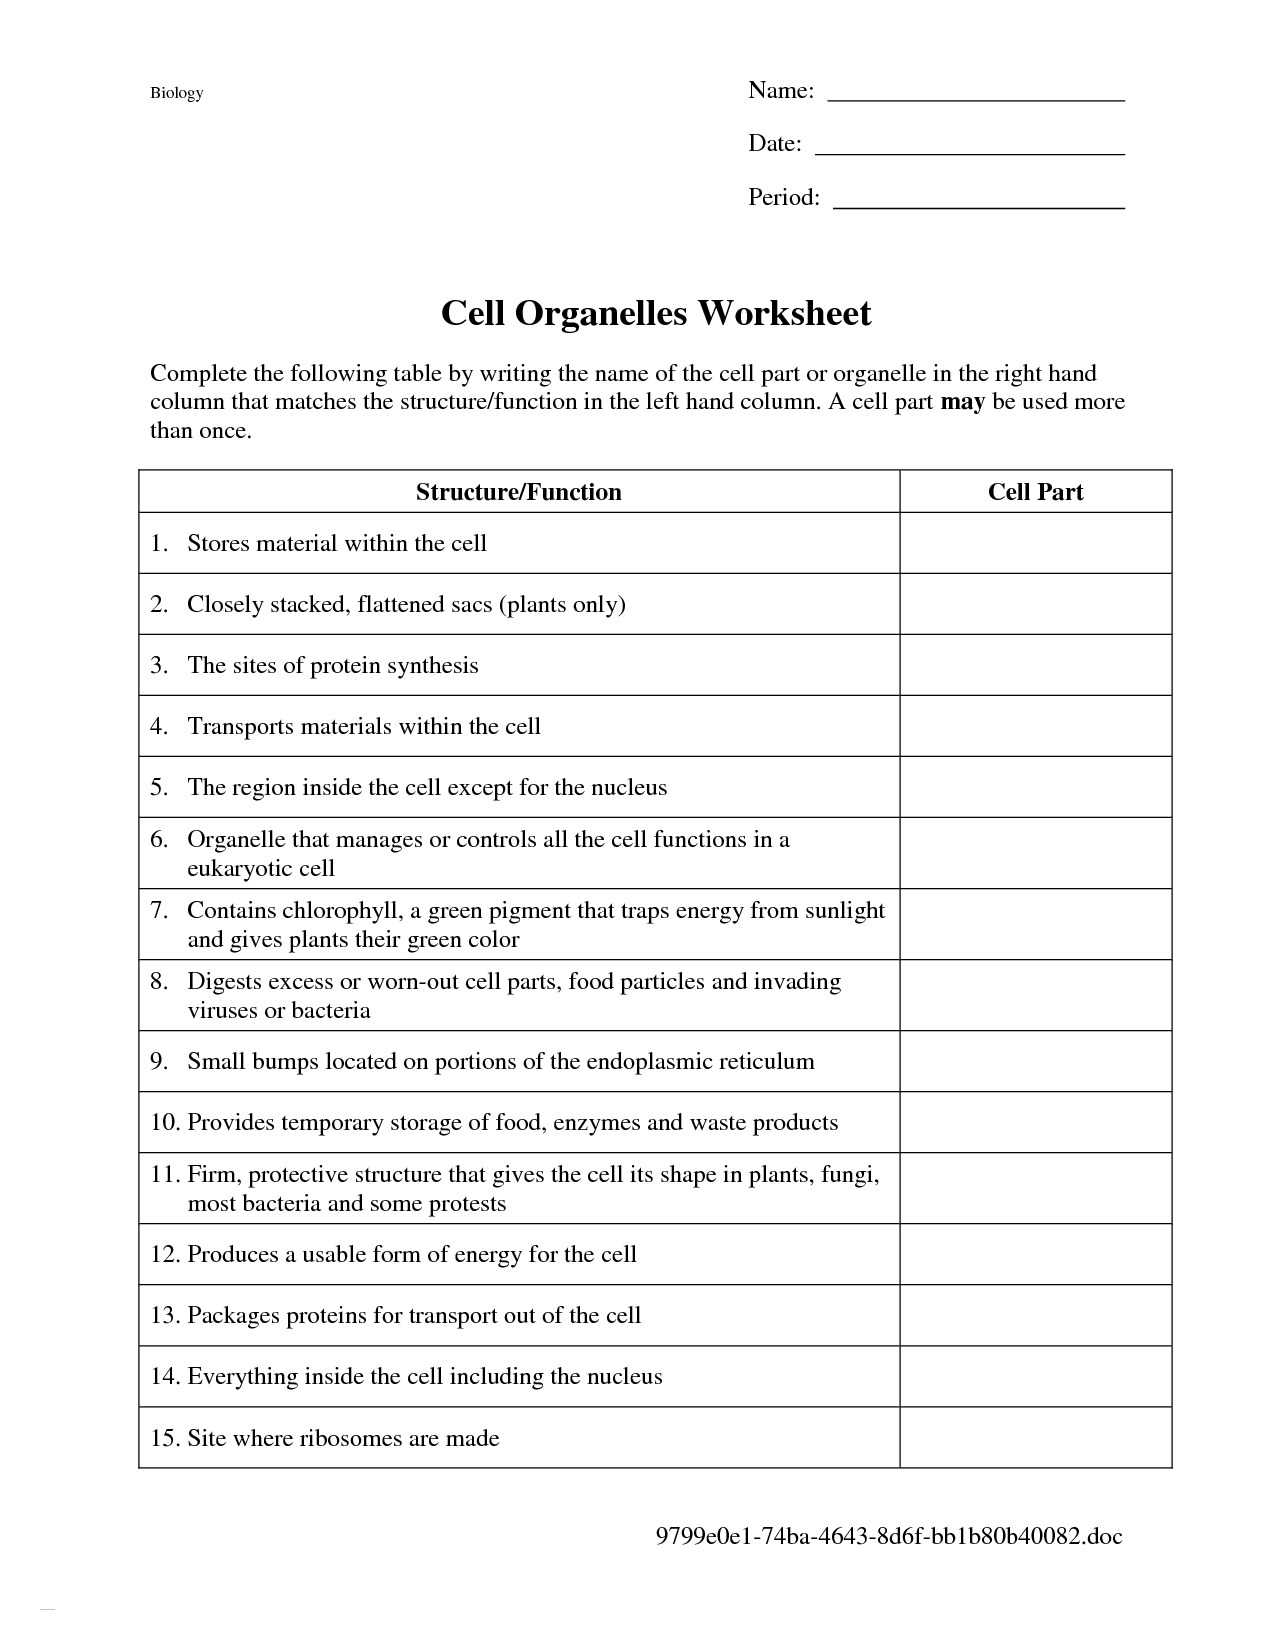 Cells and organelles Worksheet Also Diagram Cell organelles Newest Cell Membrane Worksheet Google